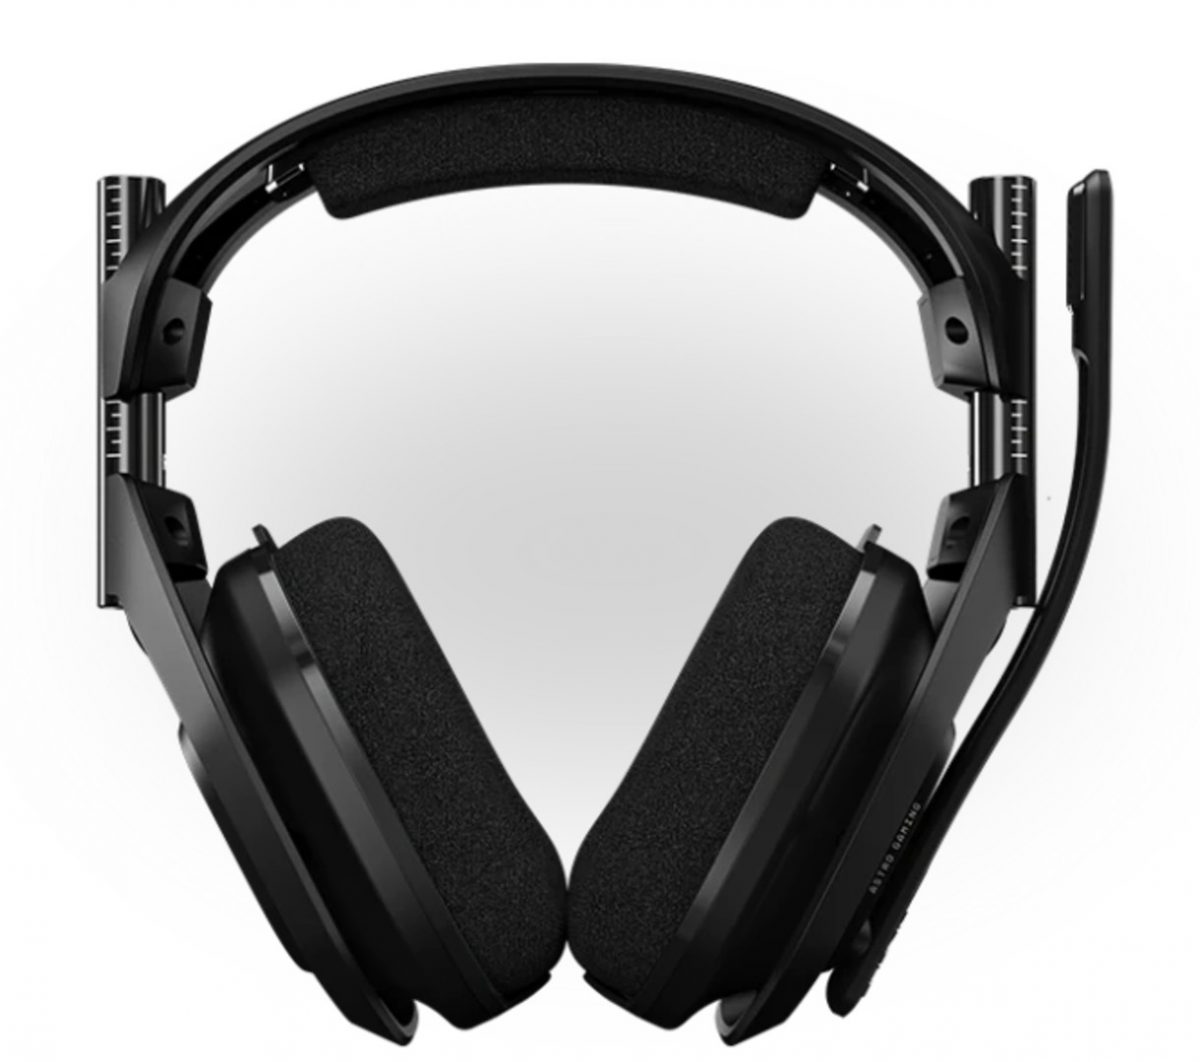 Astro A50 wireless gaming headset